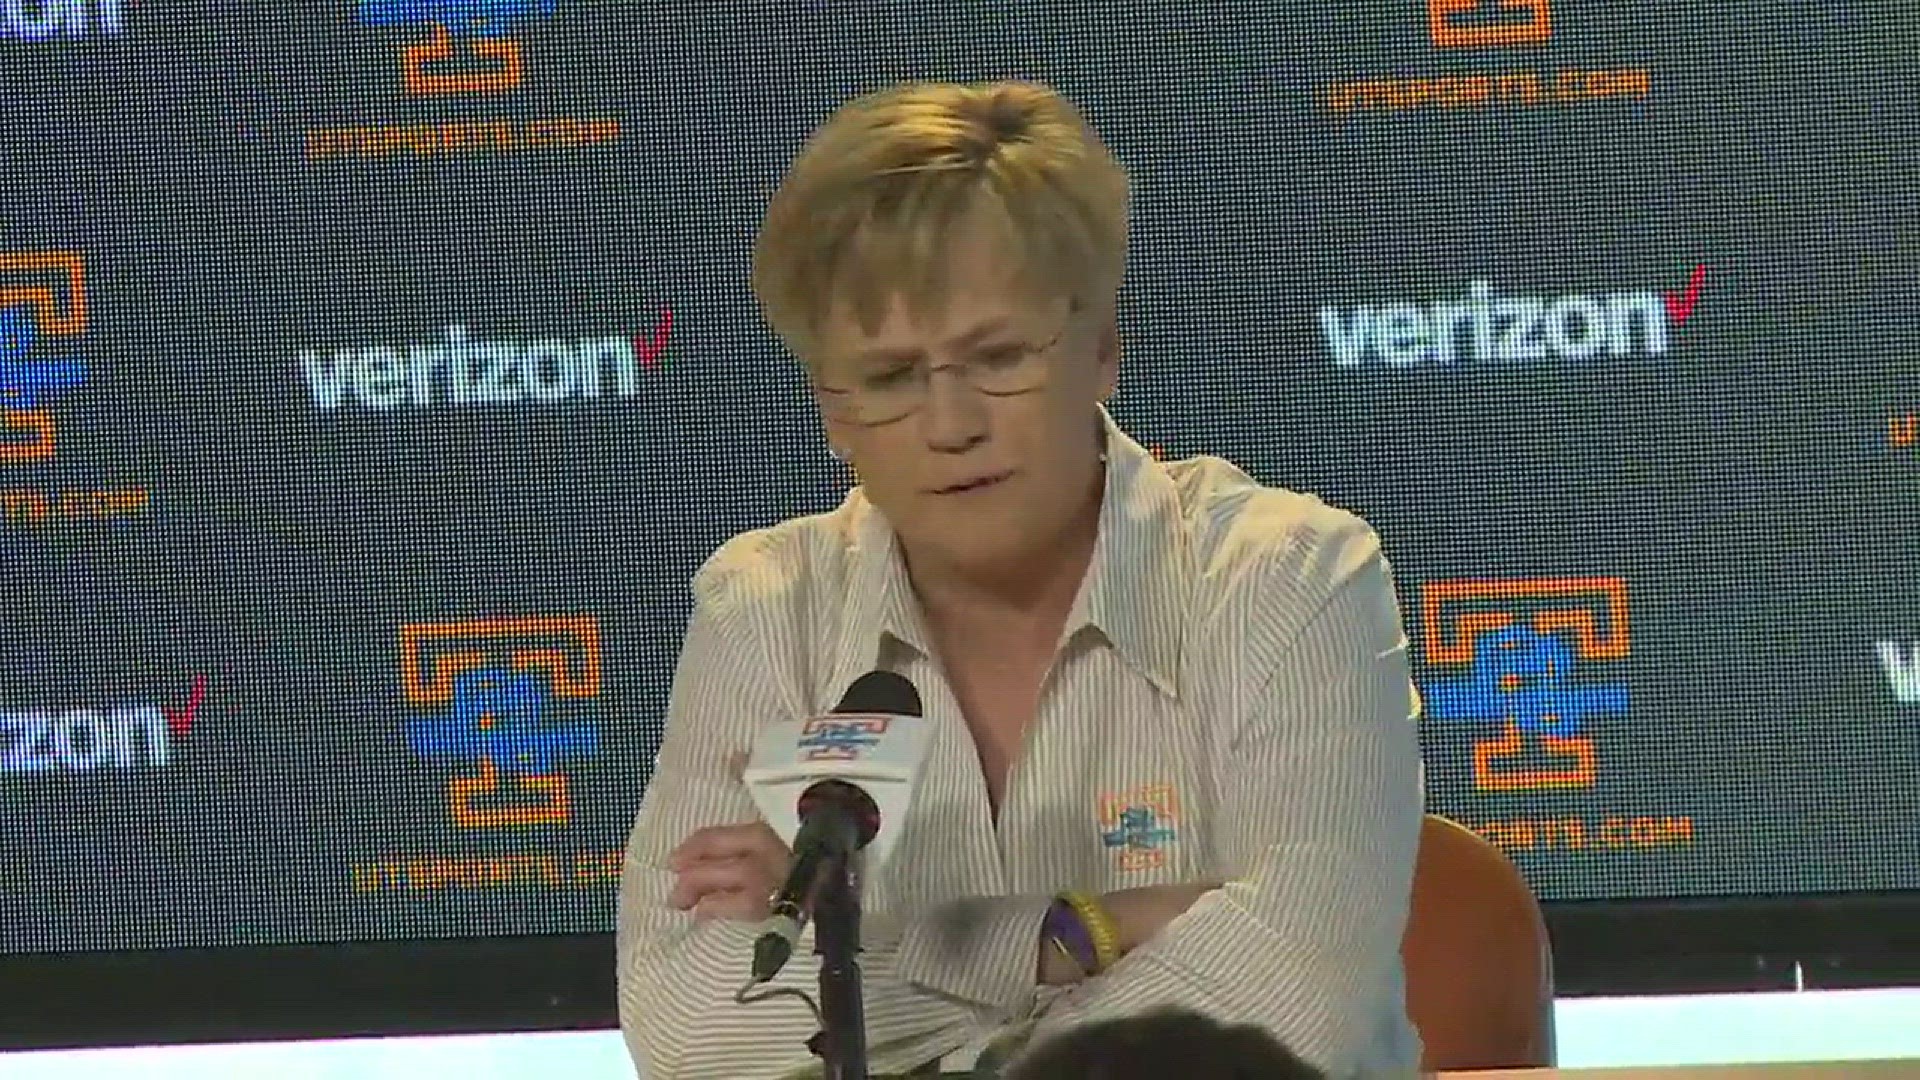 Coming off a sub-par season by Lady Vol standards and with a stacked roster for 2017-18, many think next season will be a make or break one for Holly Warlick. She's not thinking of it that way.